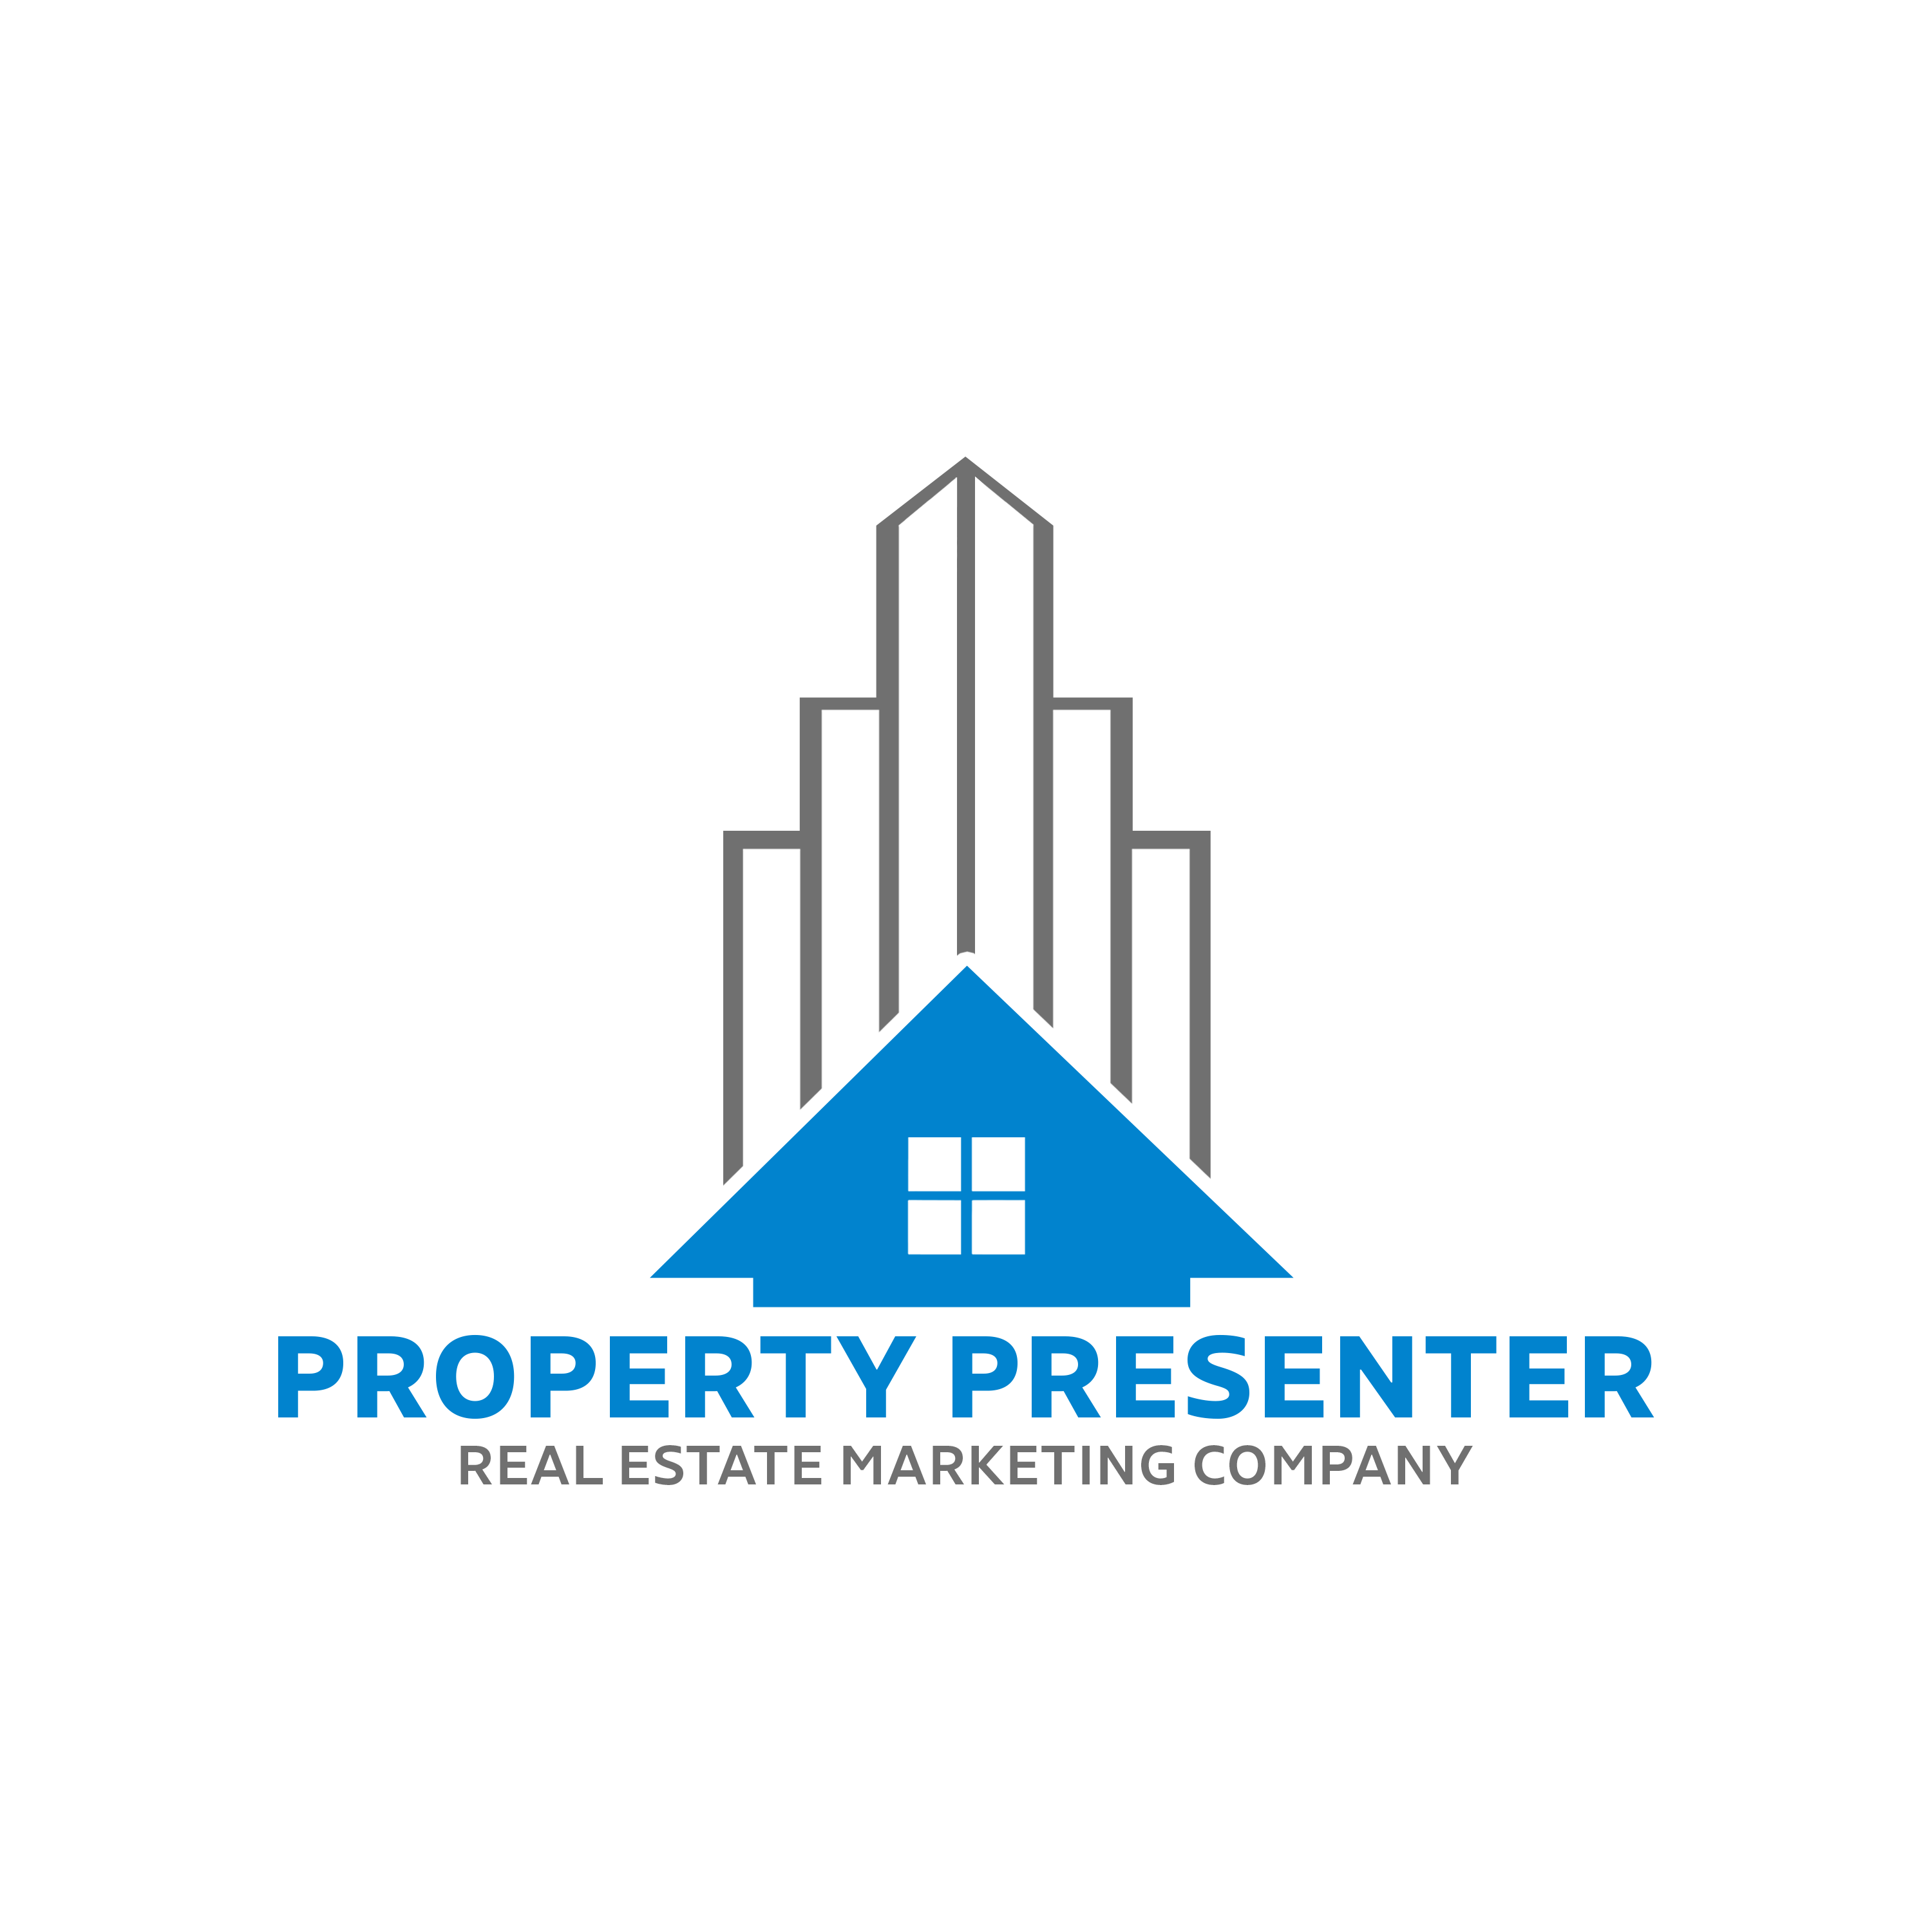 Please check on Logo for Pakistan's Real Estate Industry News